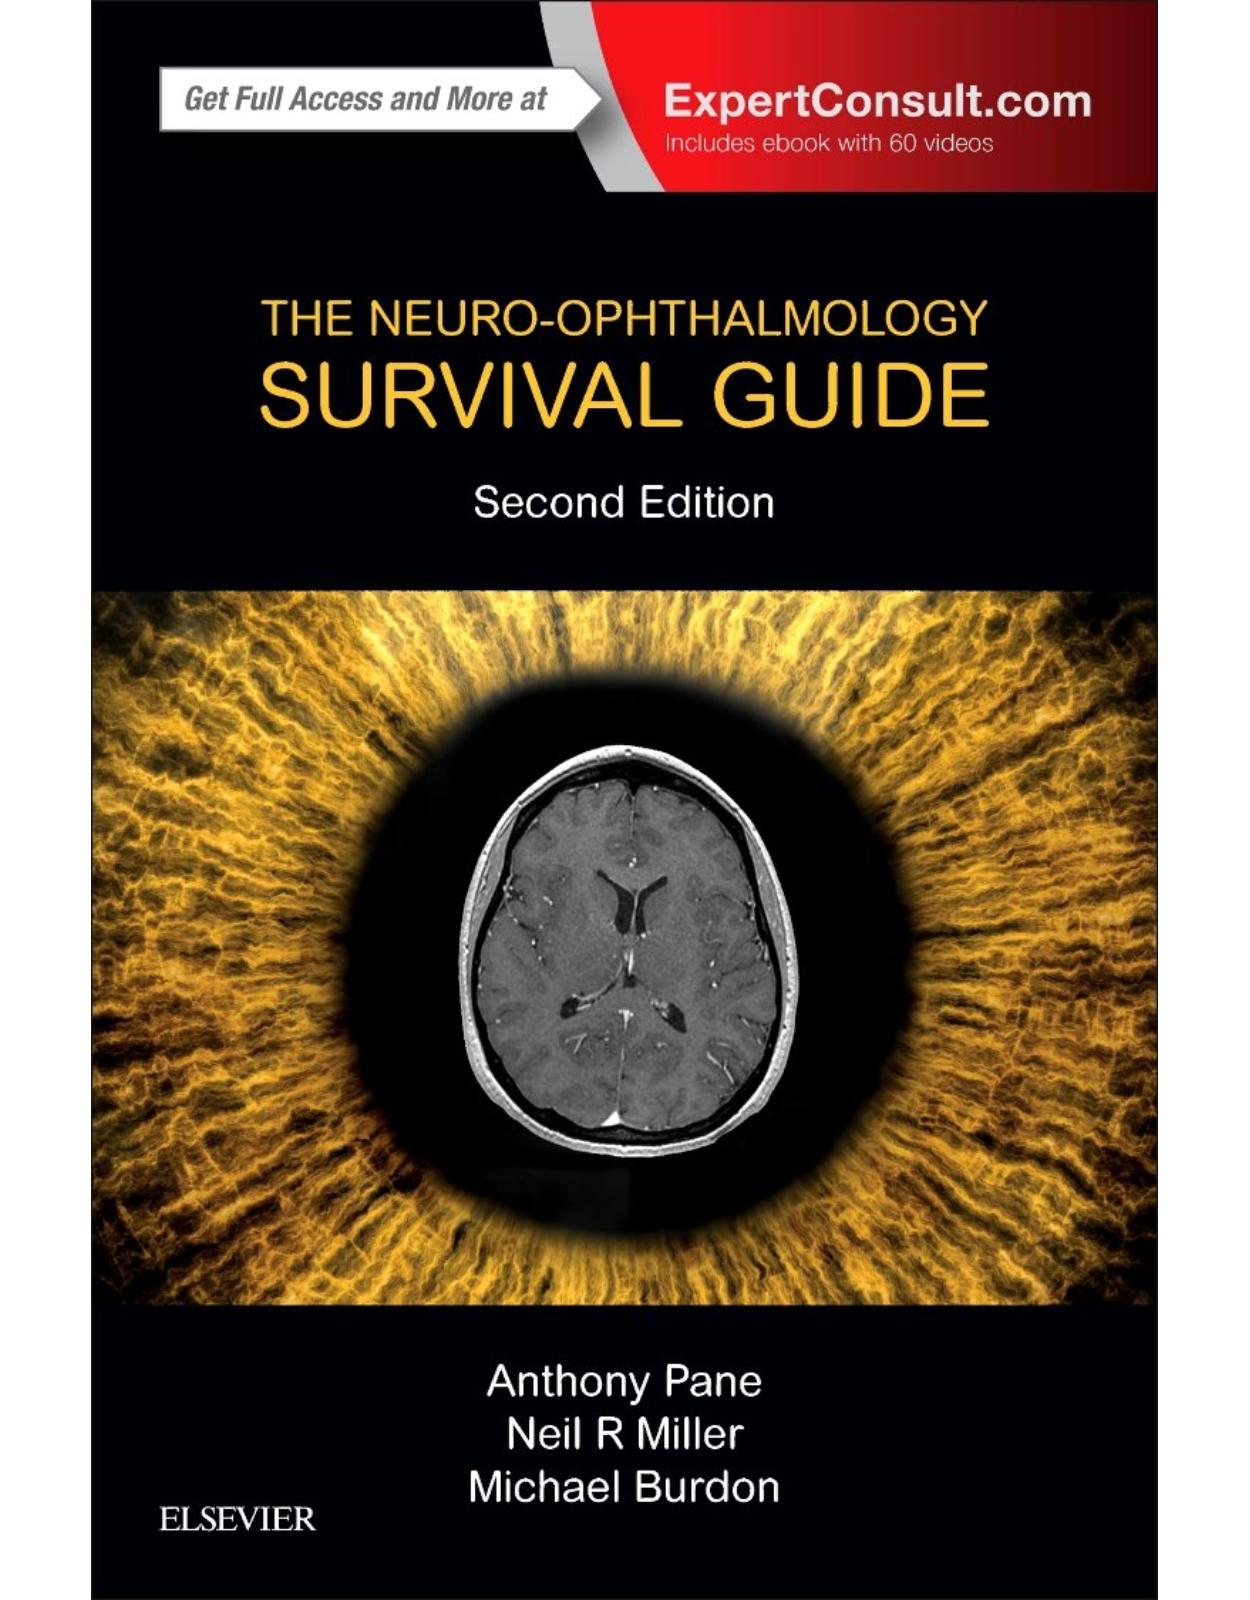 The Neuro-Ophthalmology Survival Guide, 2nd Edition